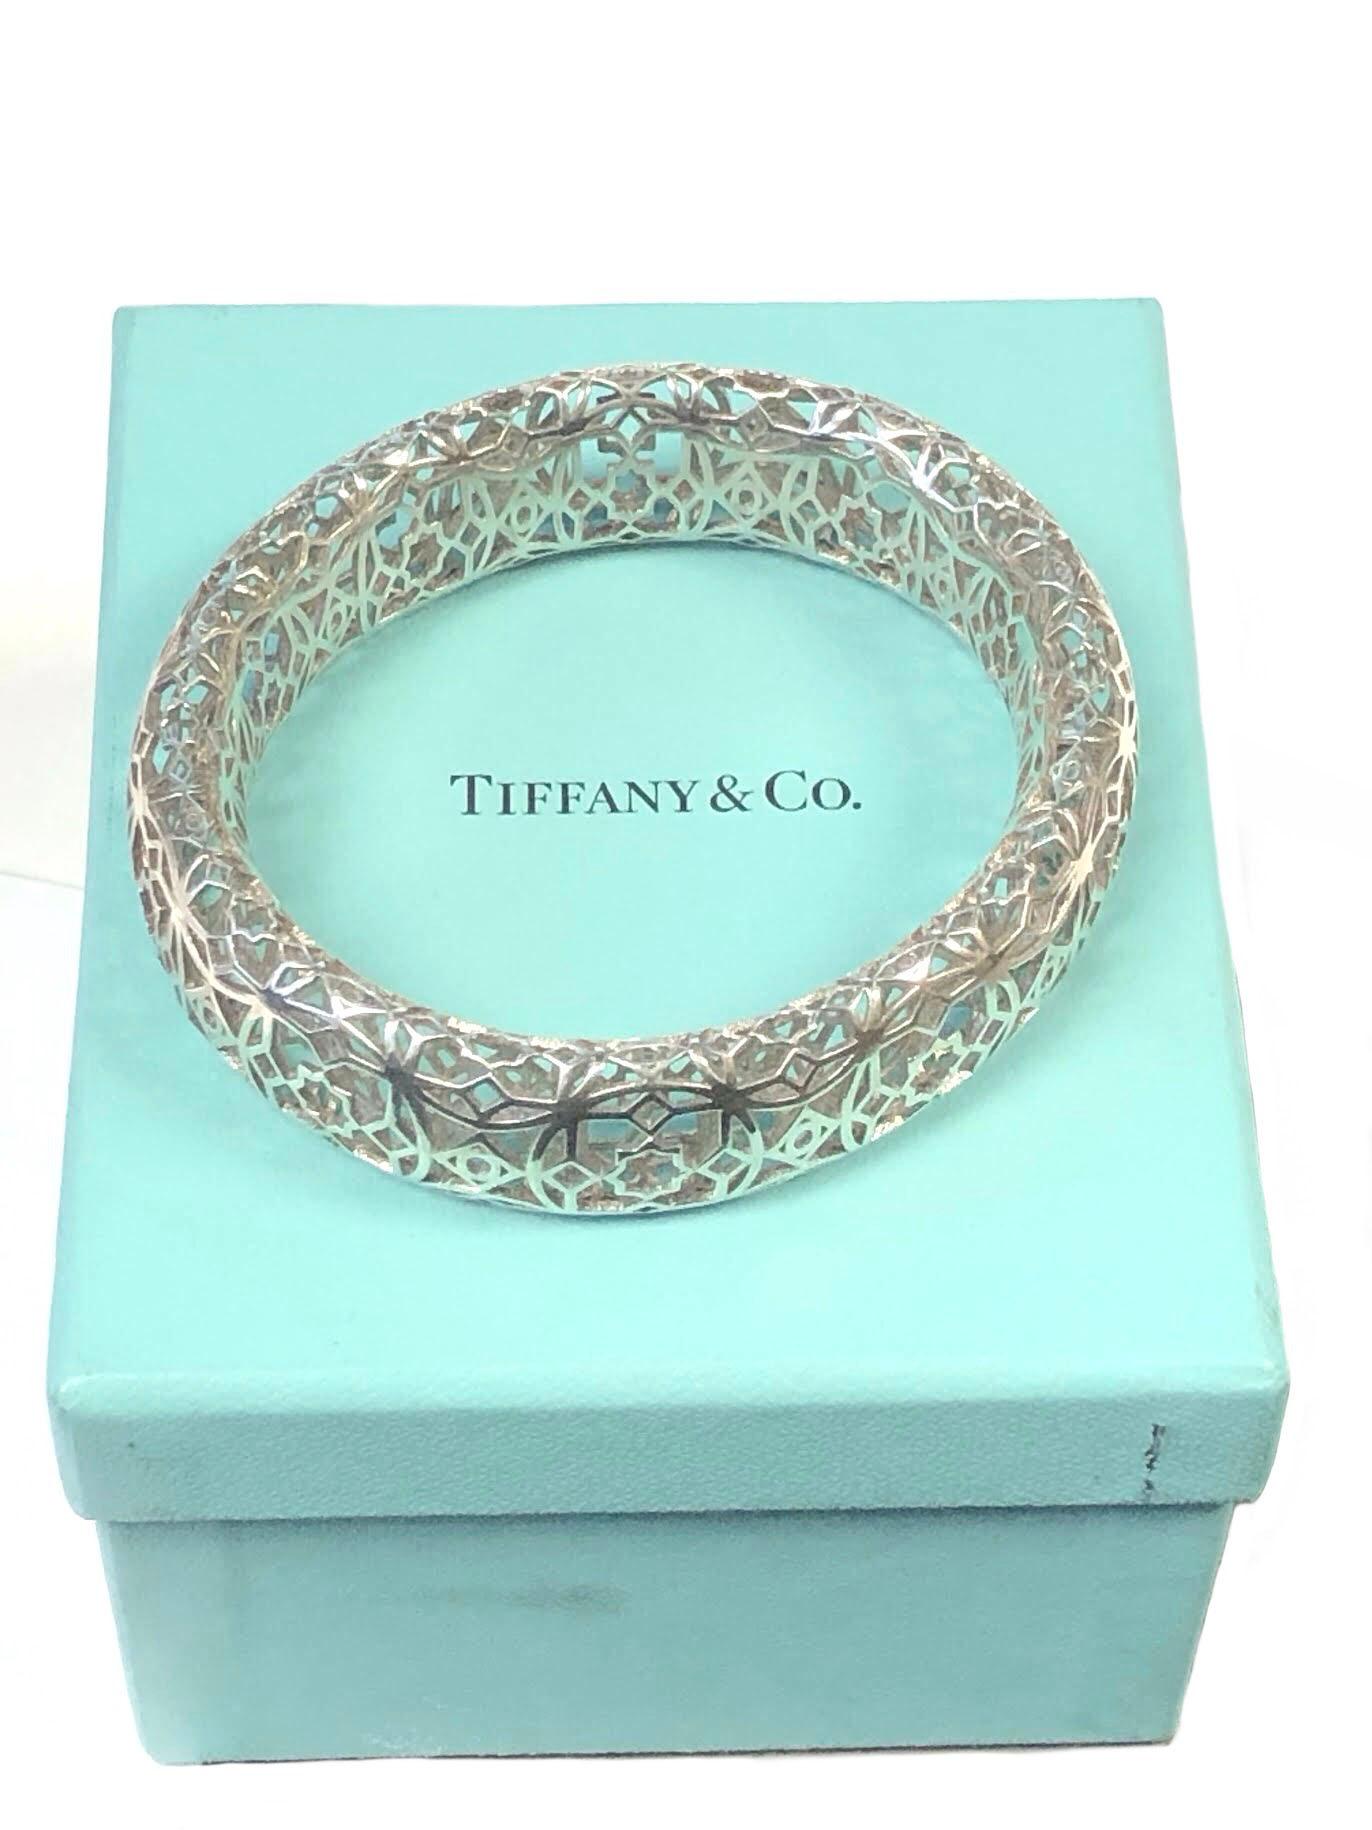 Tiffany & Company Paloma Picasso Marrakesh Sterling Bangle Bracelet In Excellent Condition For Sale In Chicago, IL